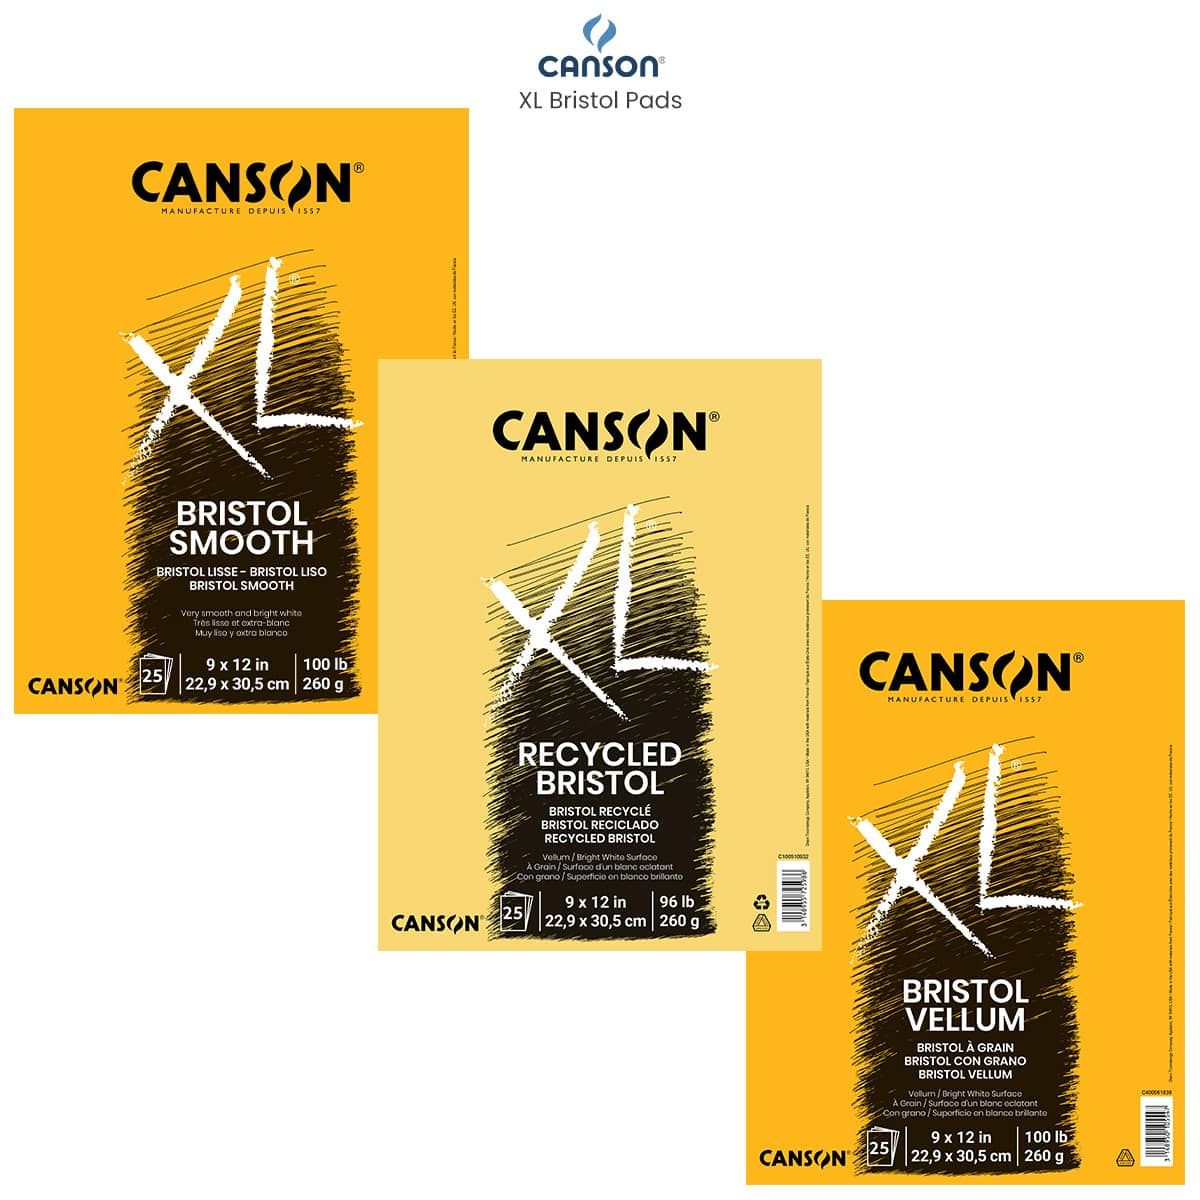 Canson XL Series Bristol Paper, Smooth, Foldover Pad, 11x17 inches, 25  Sheets (100lb/260g) - Artist Paper for Adults and Students - Markers, Pen  and Ink : Arts, Crafts & Sewing 